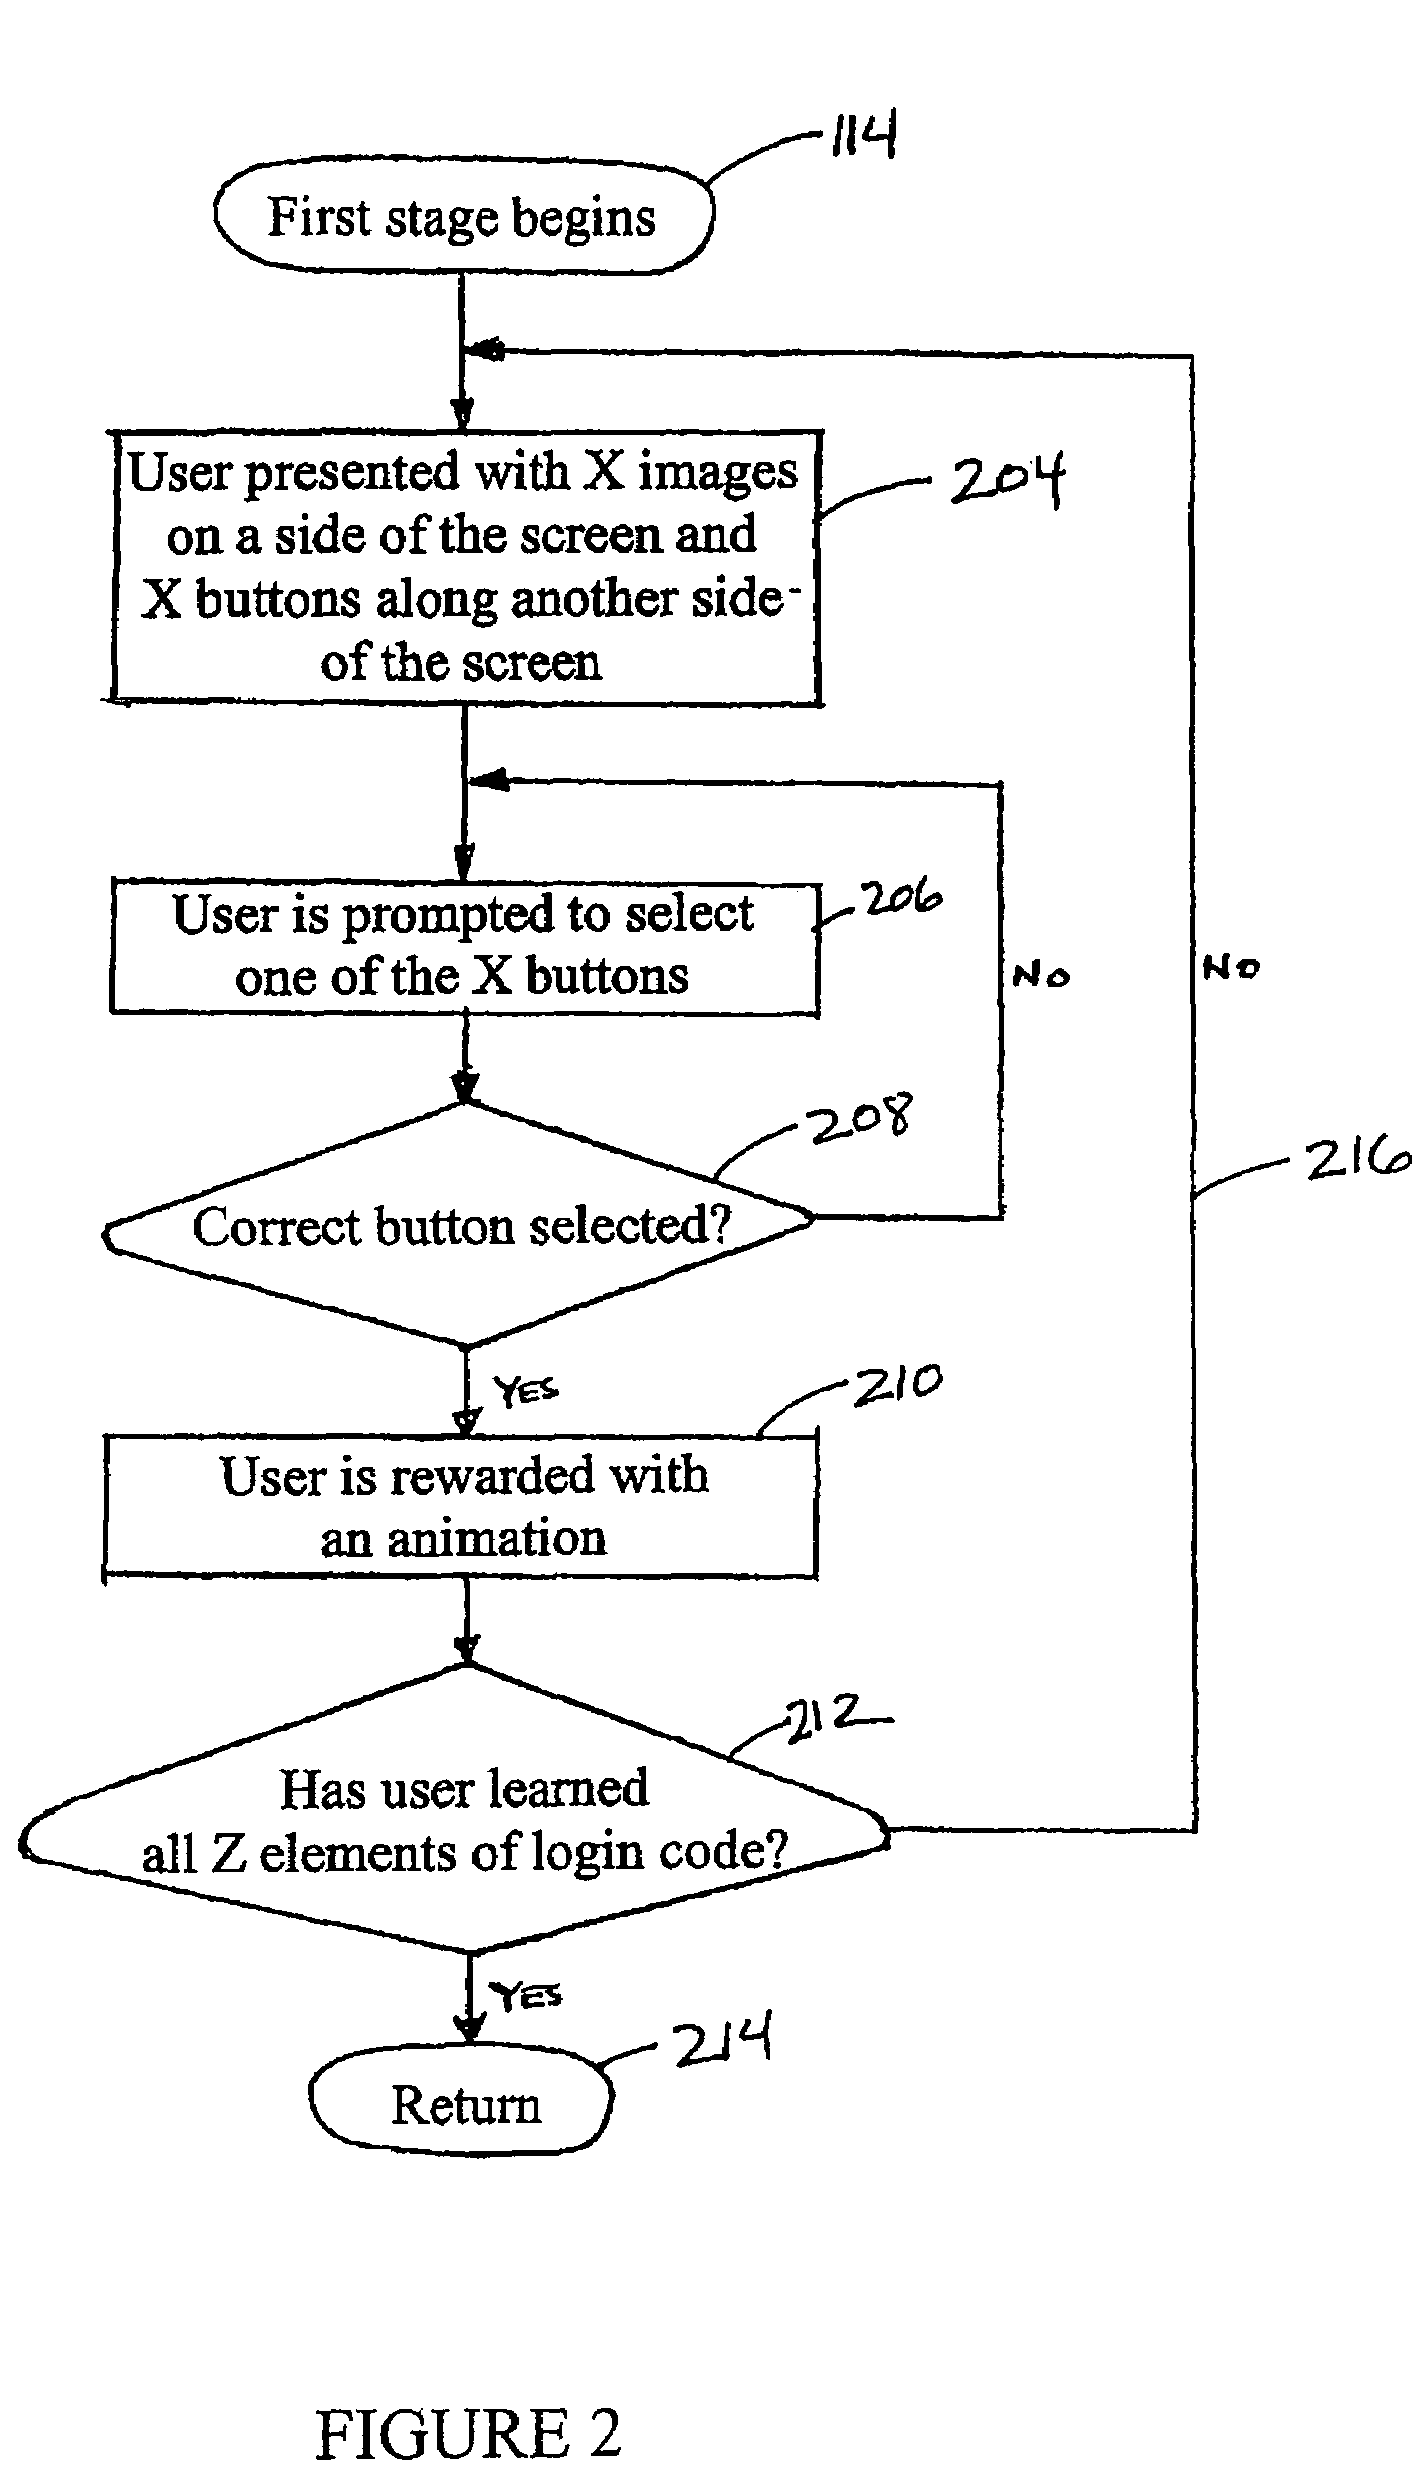 System and method for user login and tracking